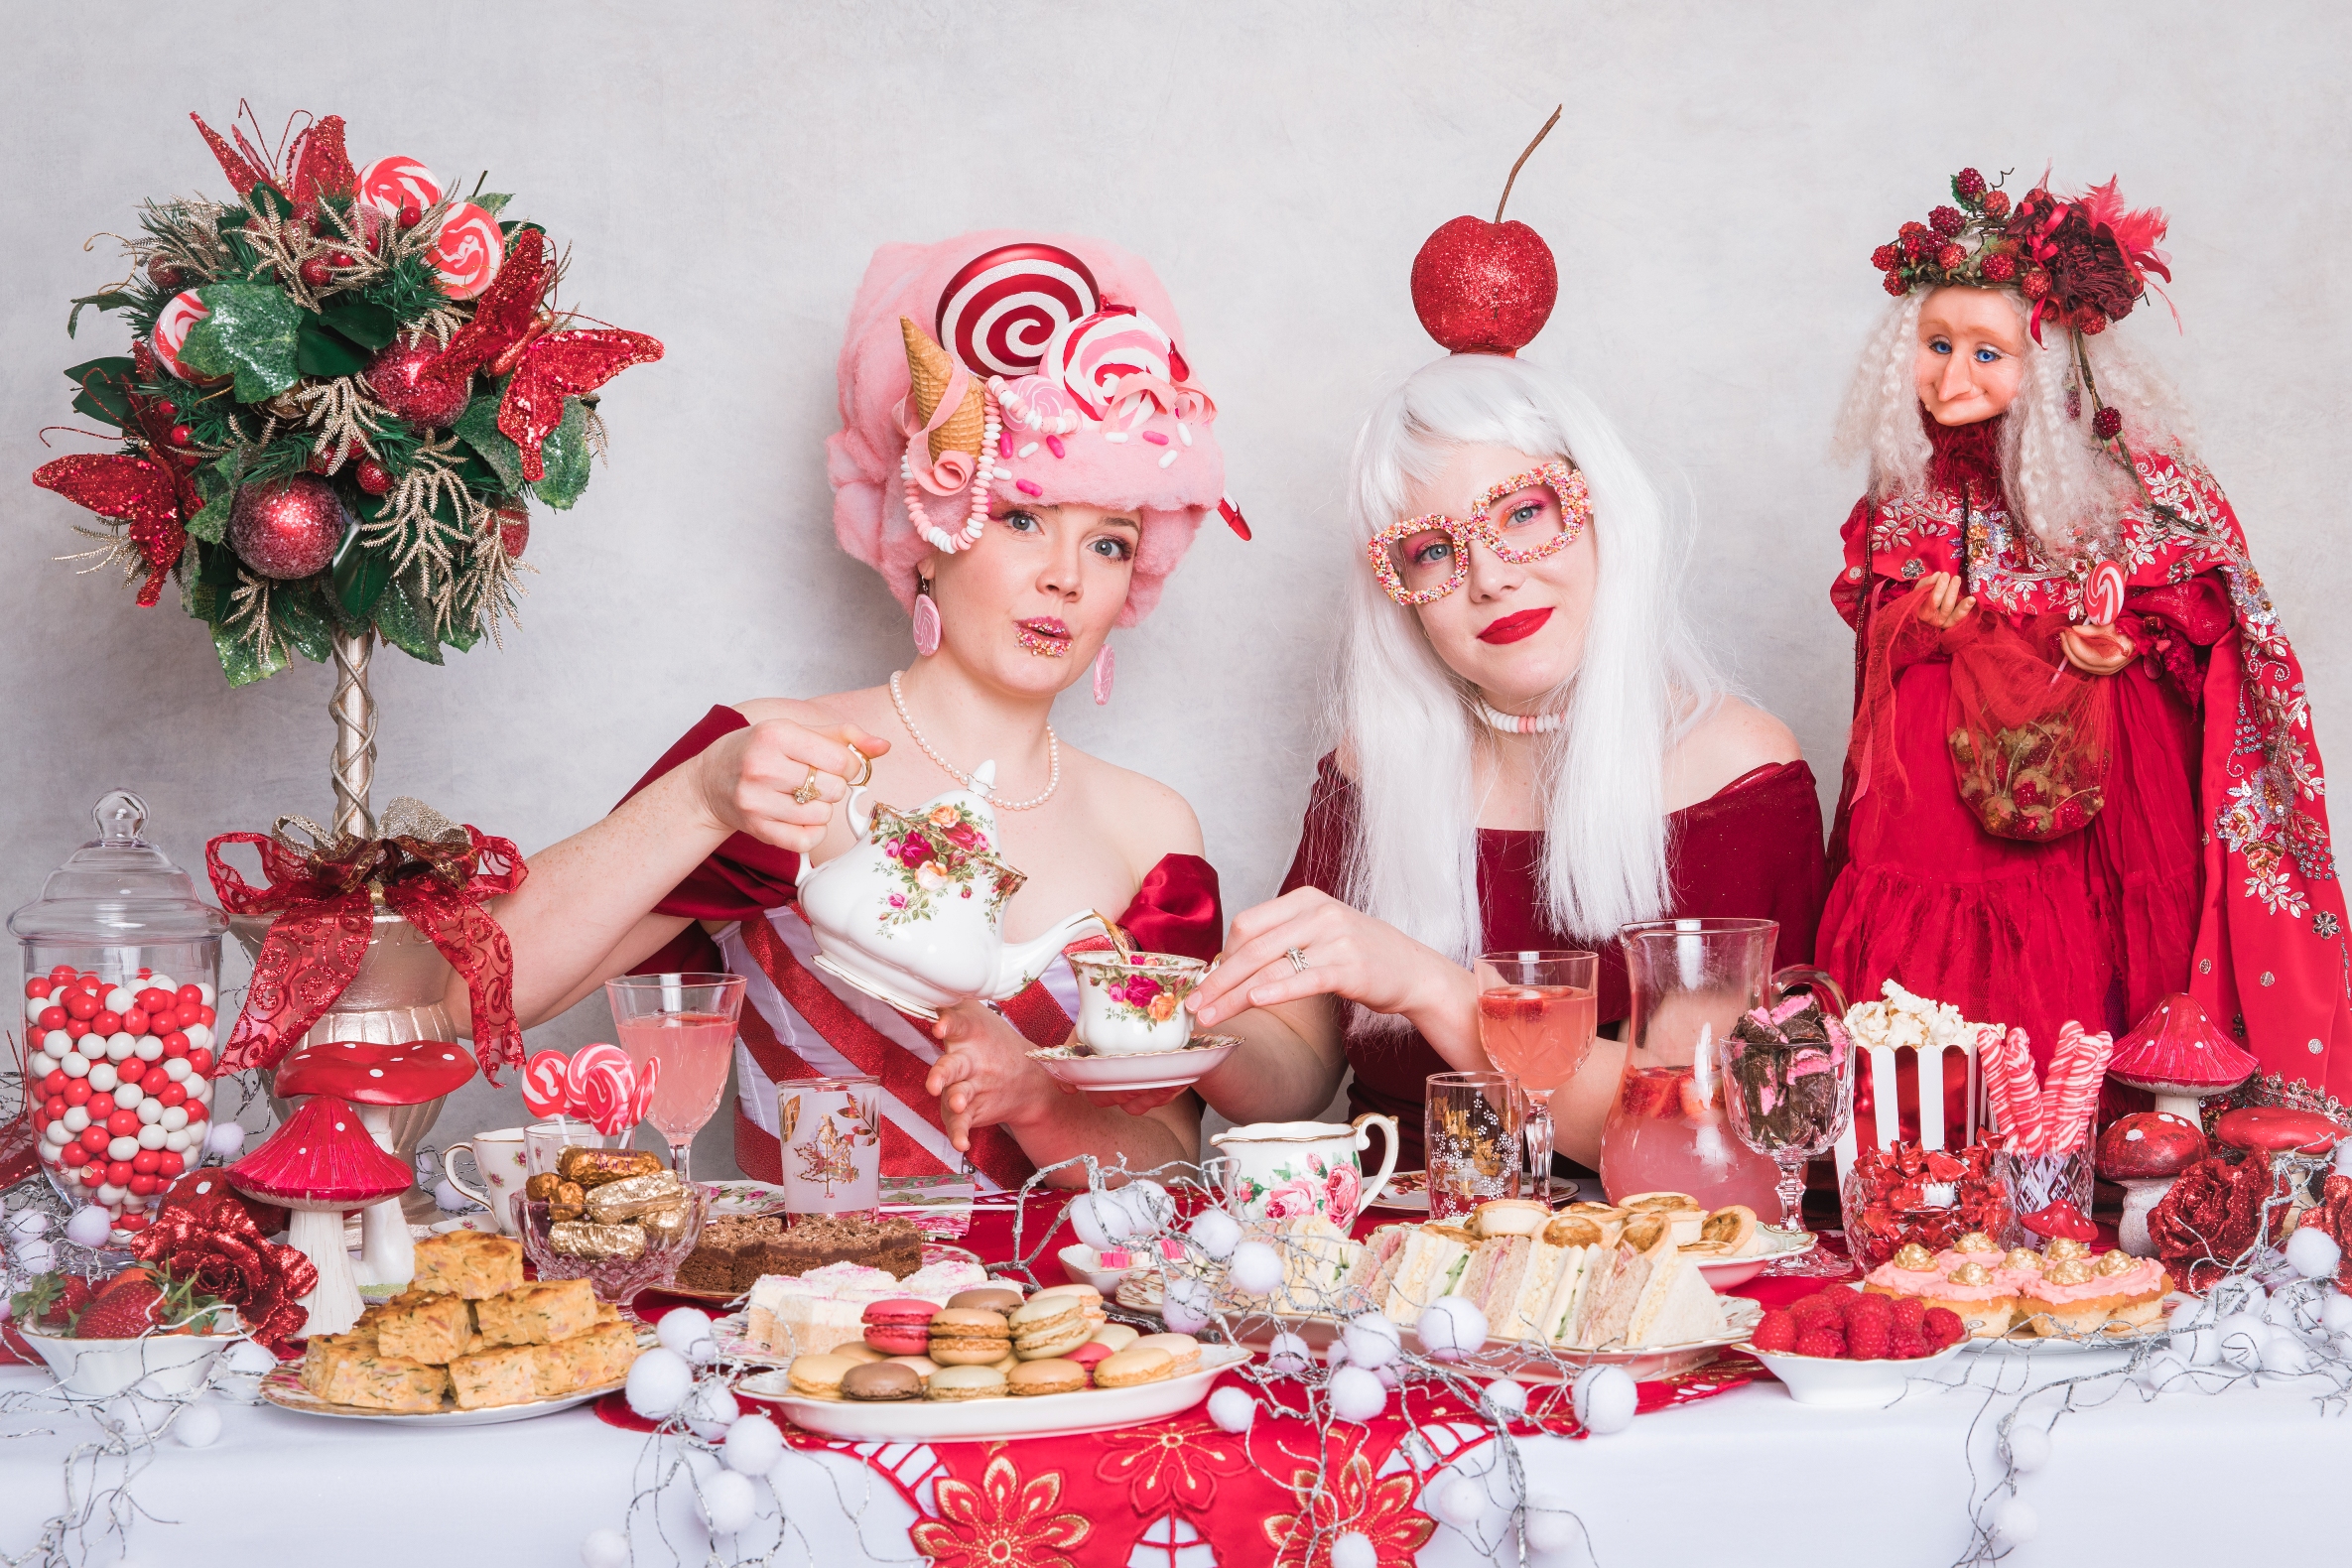 The Faeries Tea Party